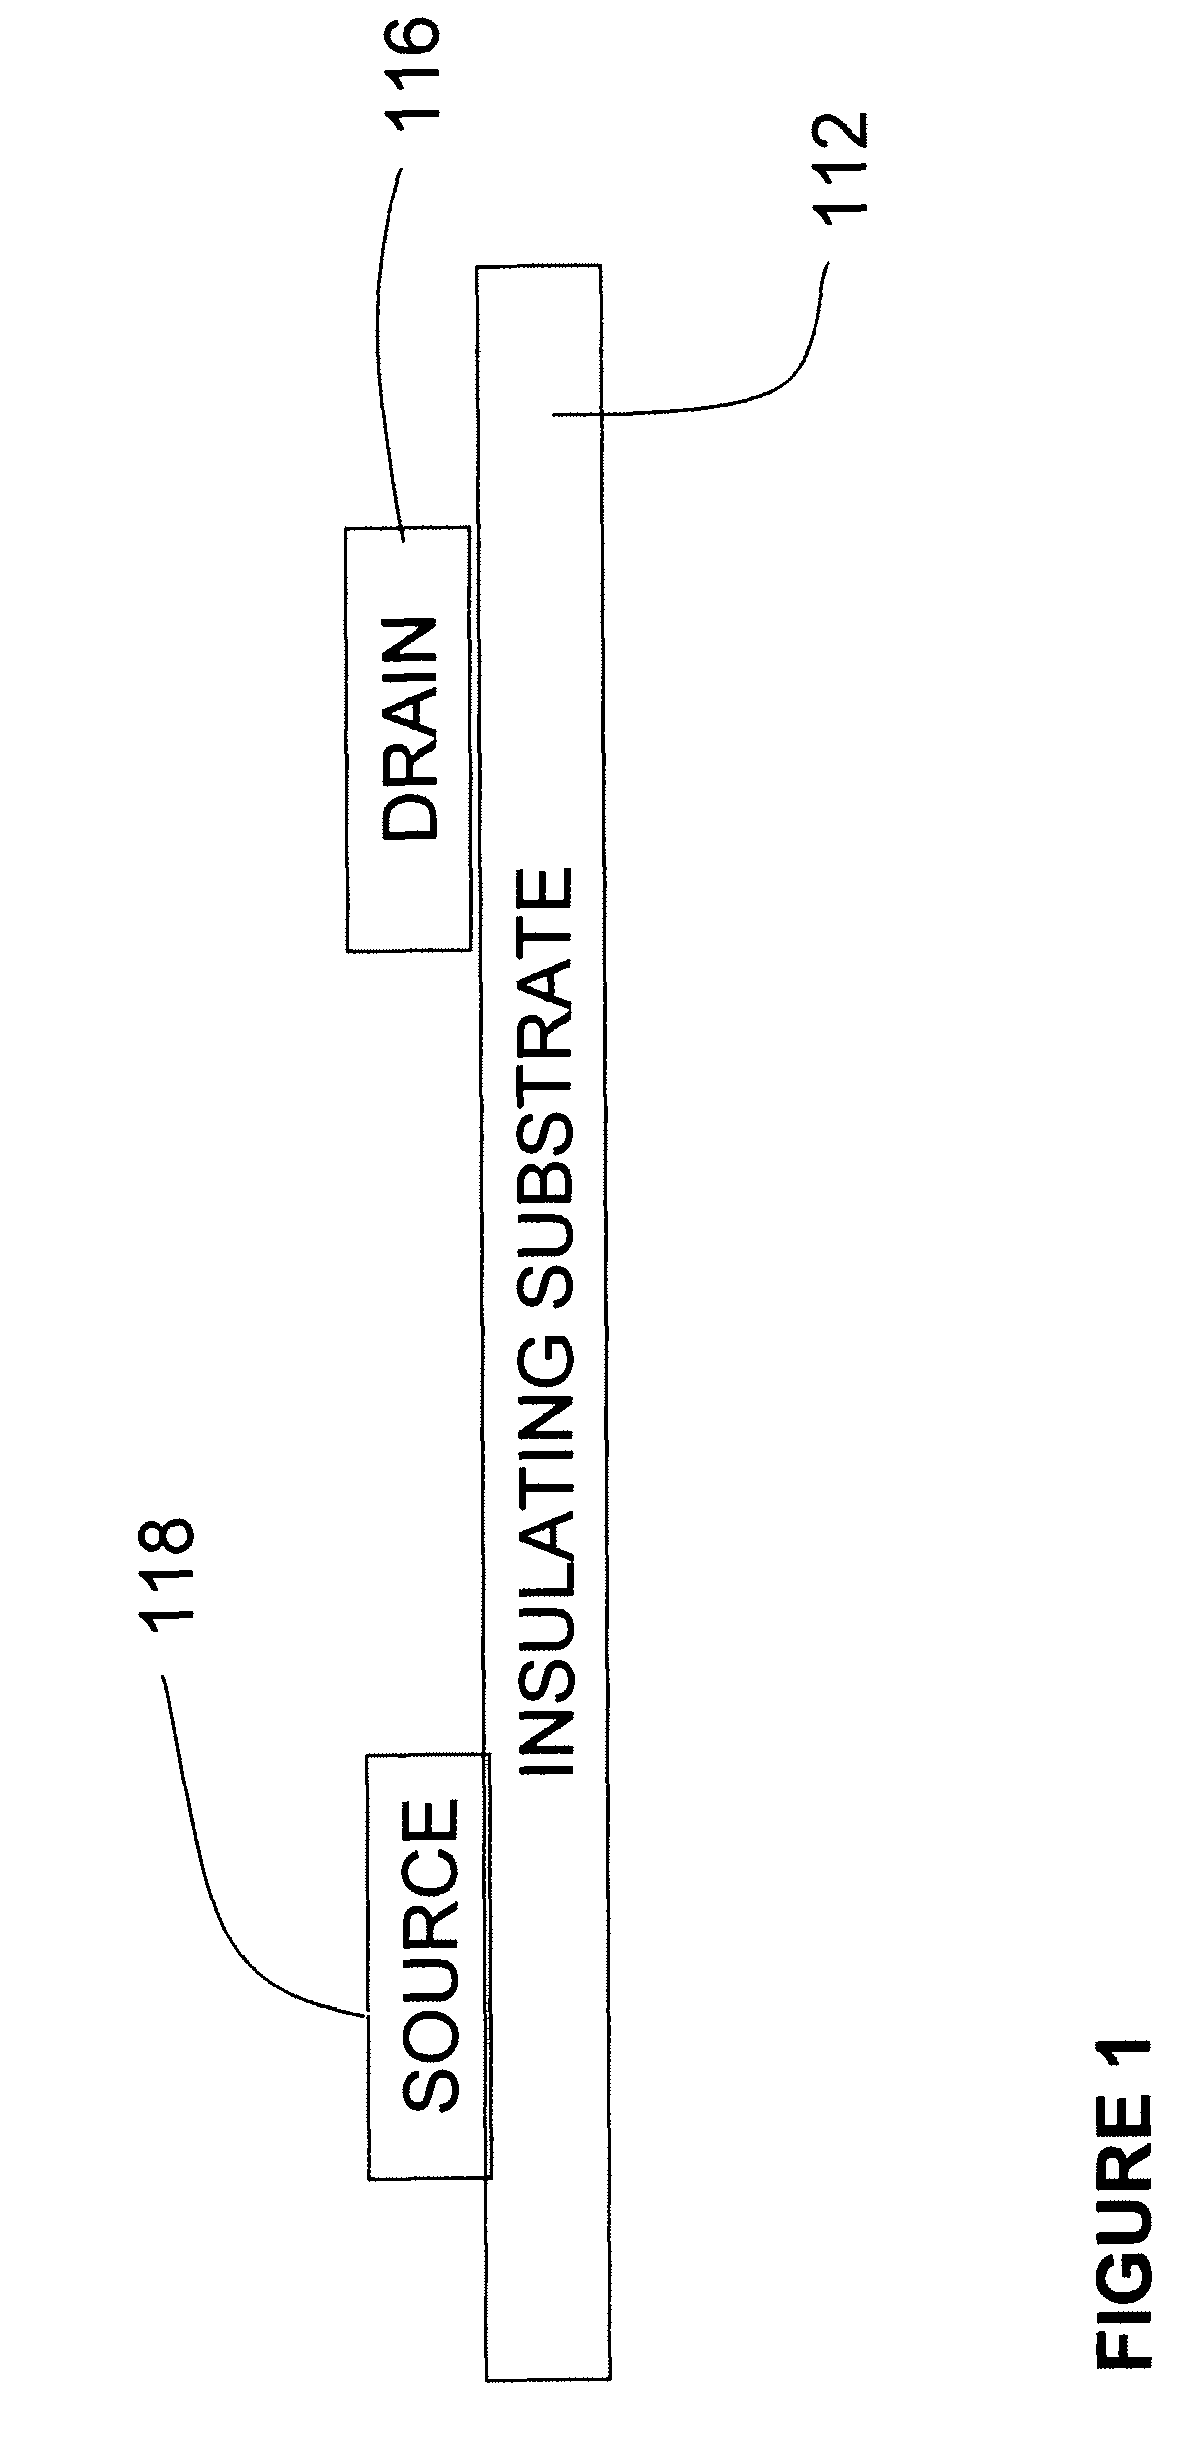 Method of increasing yield in OFETs by using a high-K dielectric layer in a dual dielectric layer